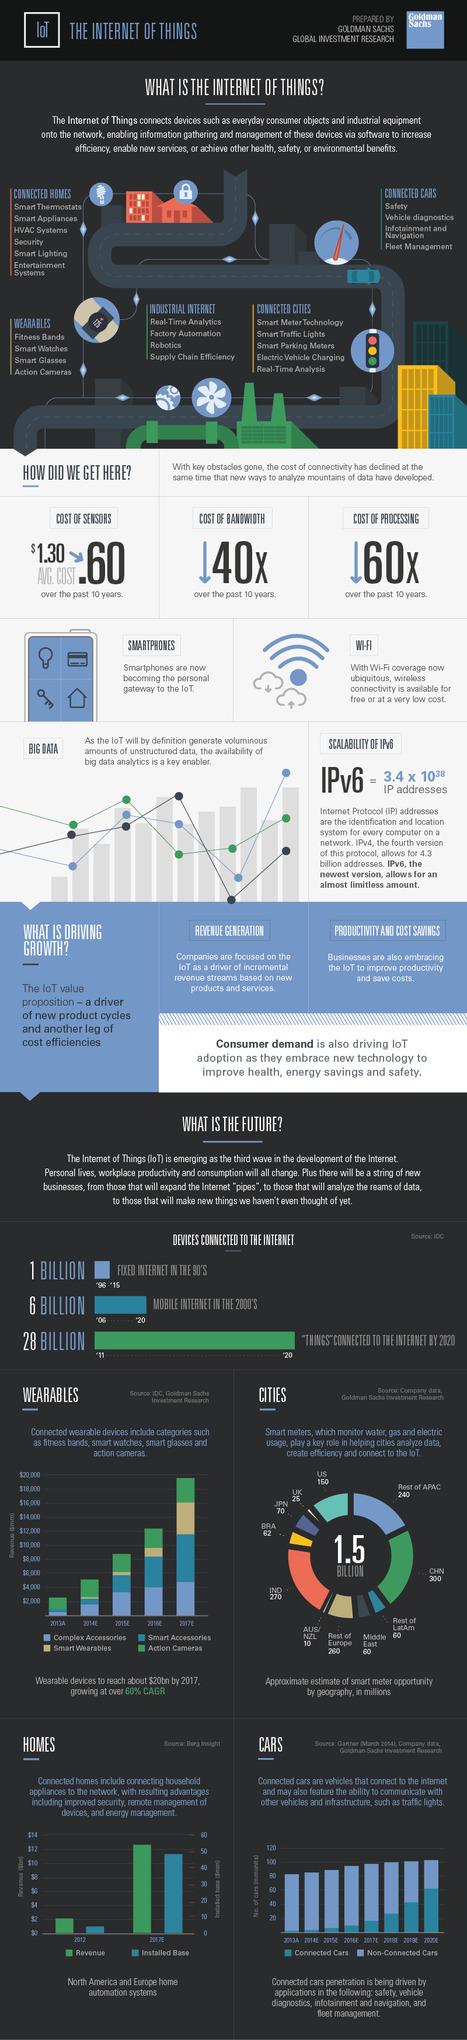 Goldman Sachs | What is the Internet of Things? [Infographic] | Education 2.0 & 3.0 | Scoop.it